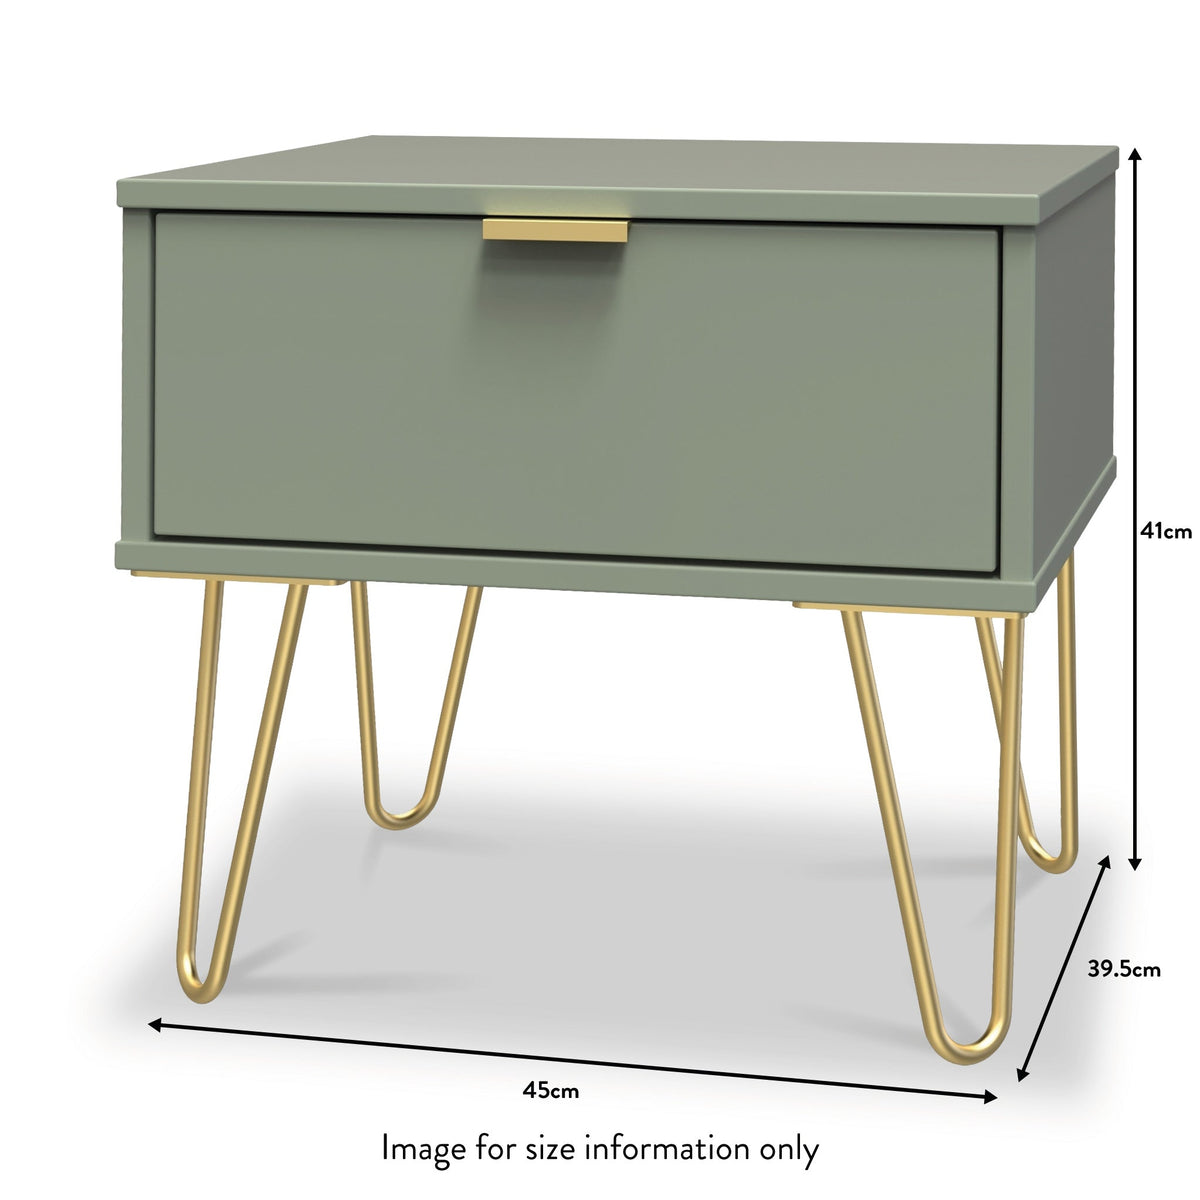 Moreno Olive Green 1 Drawer Bedside Table with gold Hairpin Legs dimensions guide